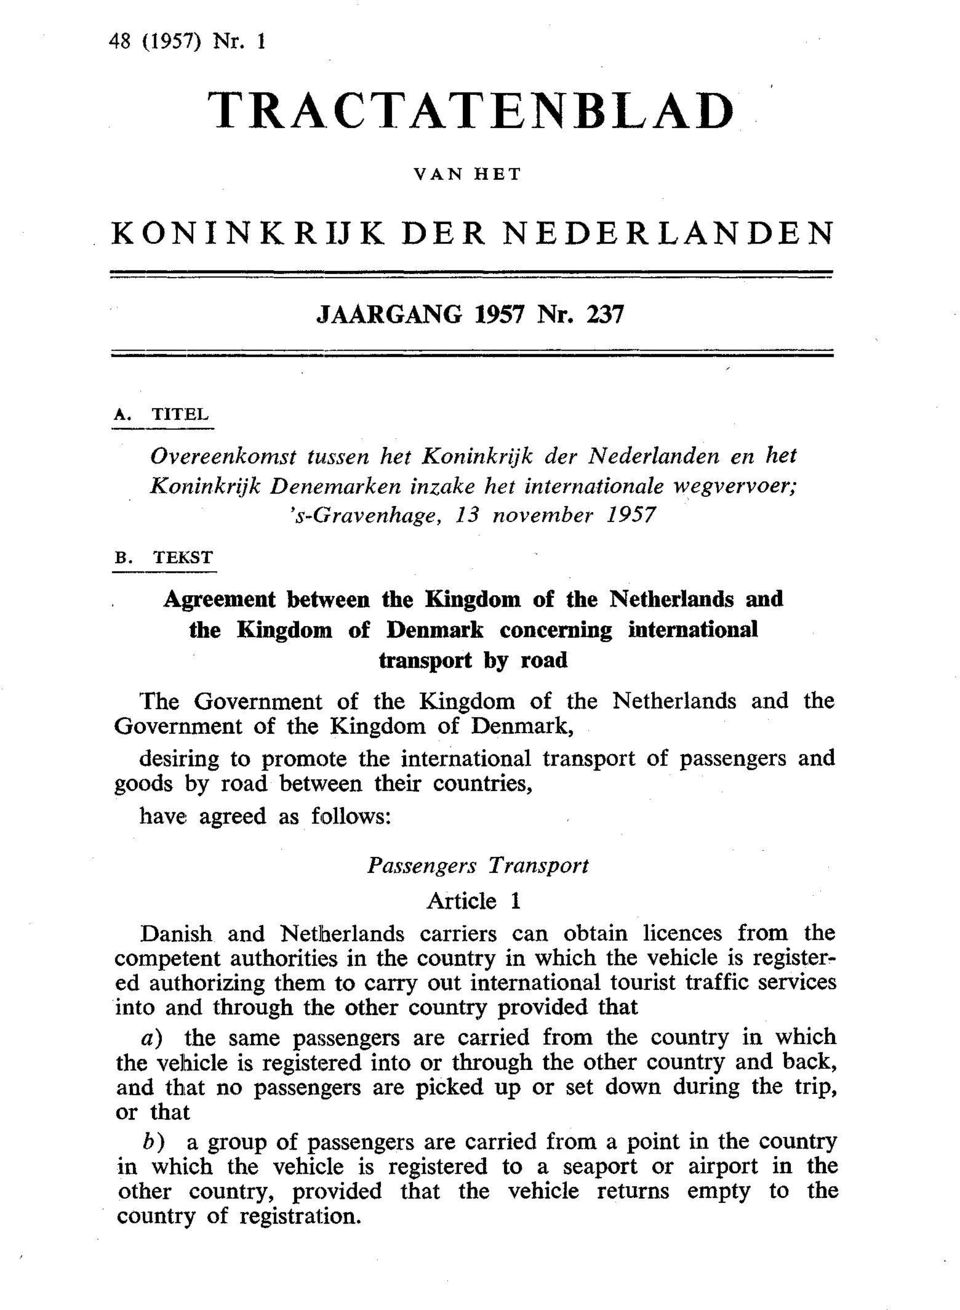 TEKST Agreement between the Kingdom of the Netherlands and the Kingdom of Denmark concerning international transport by road The Government of the Kingdom of the Netherlands and the Government of the